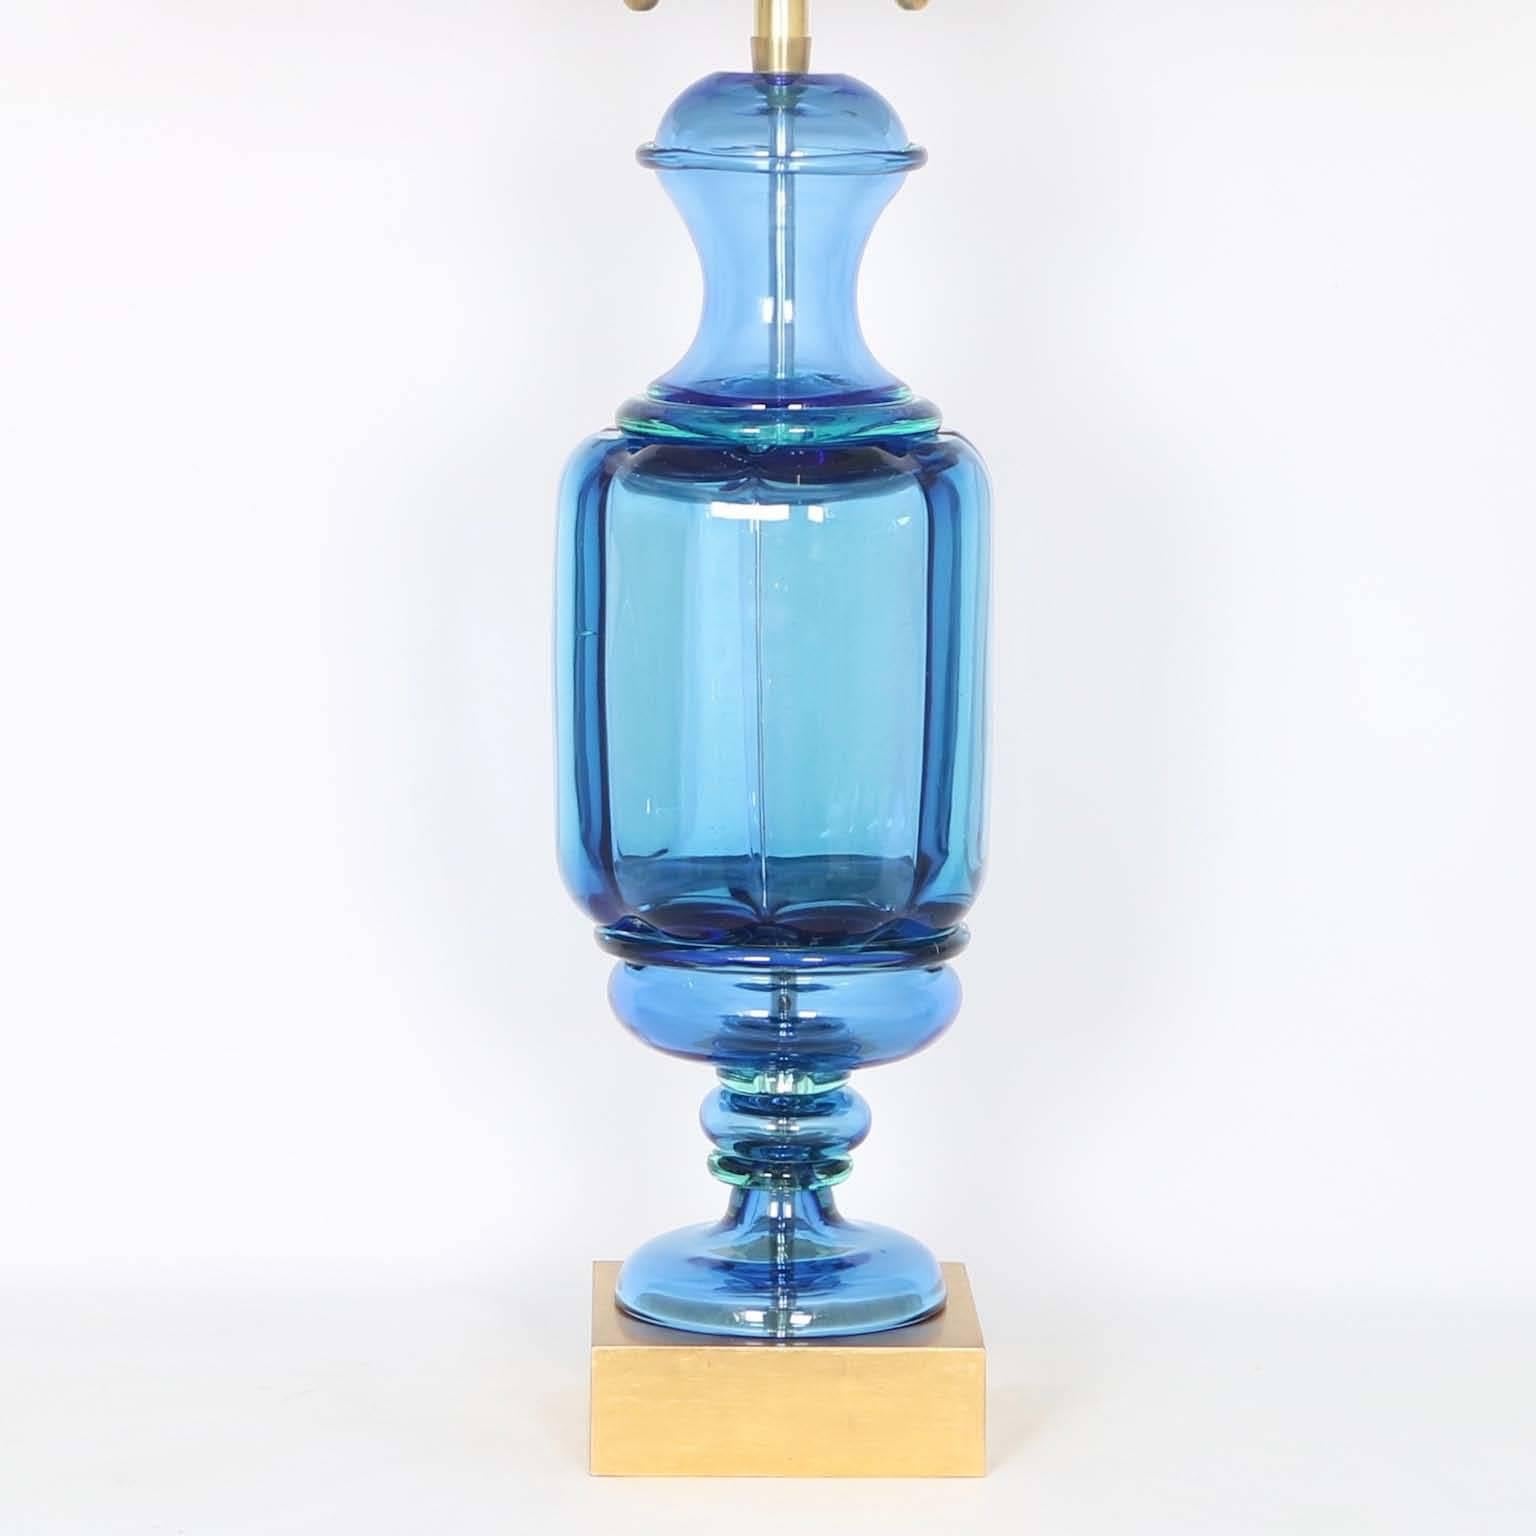 An circa 1950s Italian table lamp by Seguso for Marbro Lamp Company, with double socket cluster on clear blue, Murano glass body. The lamp is in excellent vintage condition, fully restored with all new wiring and hardware. The dimensions provided